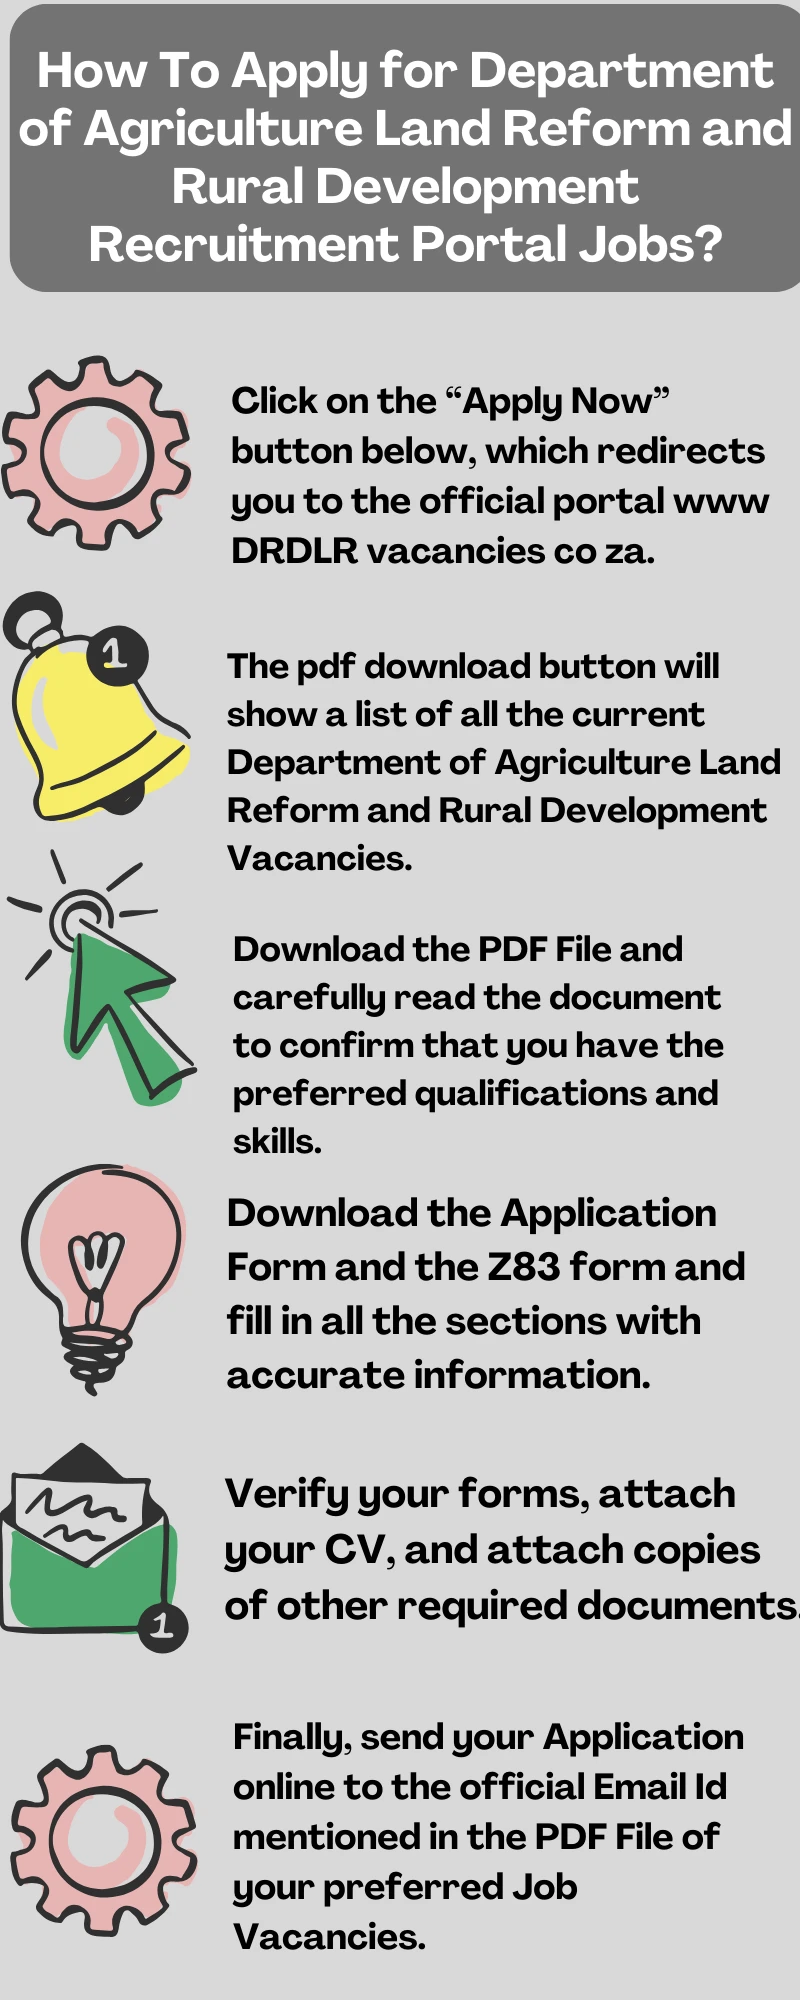 How To Apply for Department of Agriculture Land Reform and Rural Development Recruitment Portal Jobs?